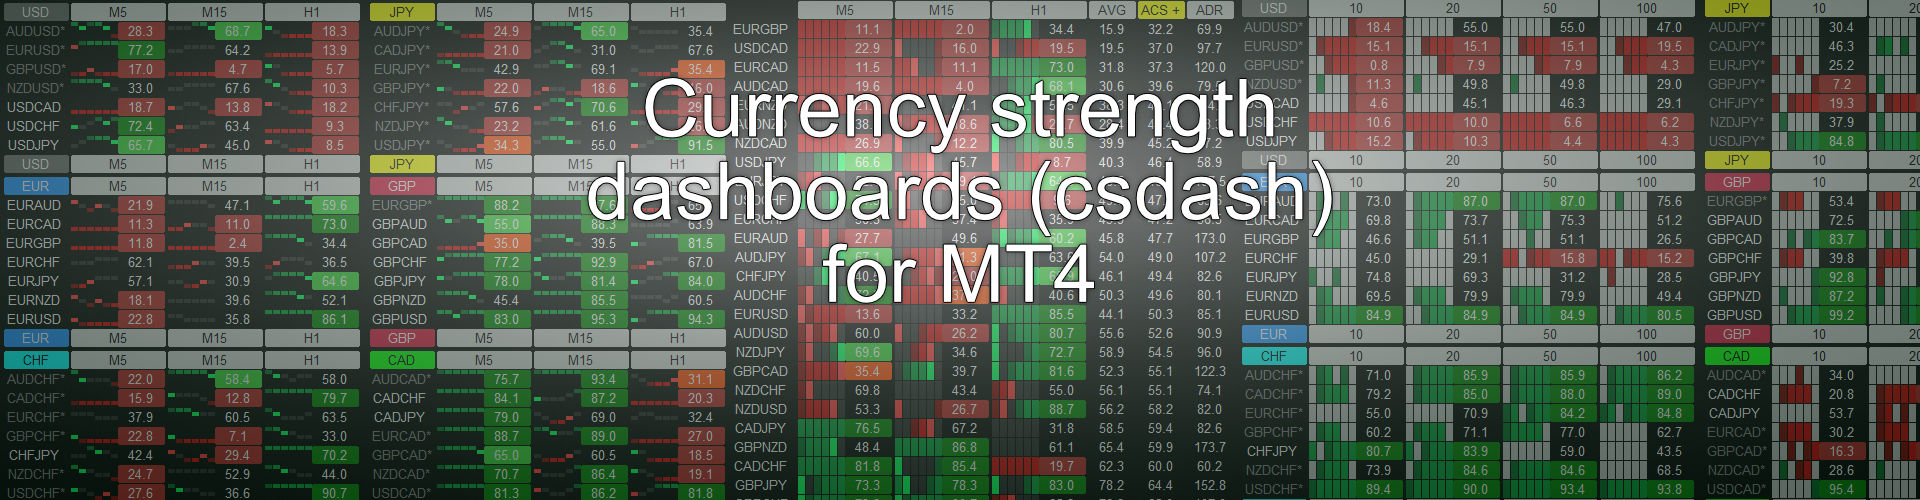 Currency Strength Dashboards(csdash) for MT4